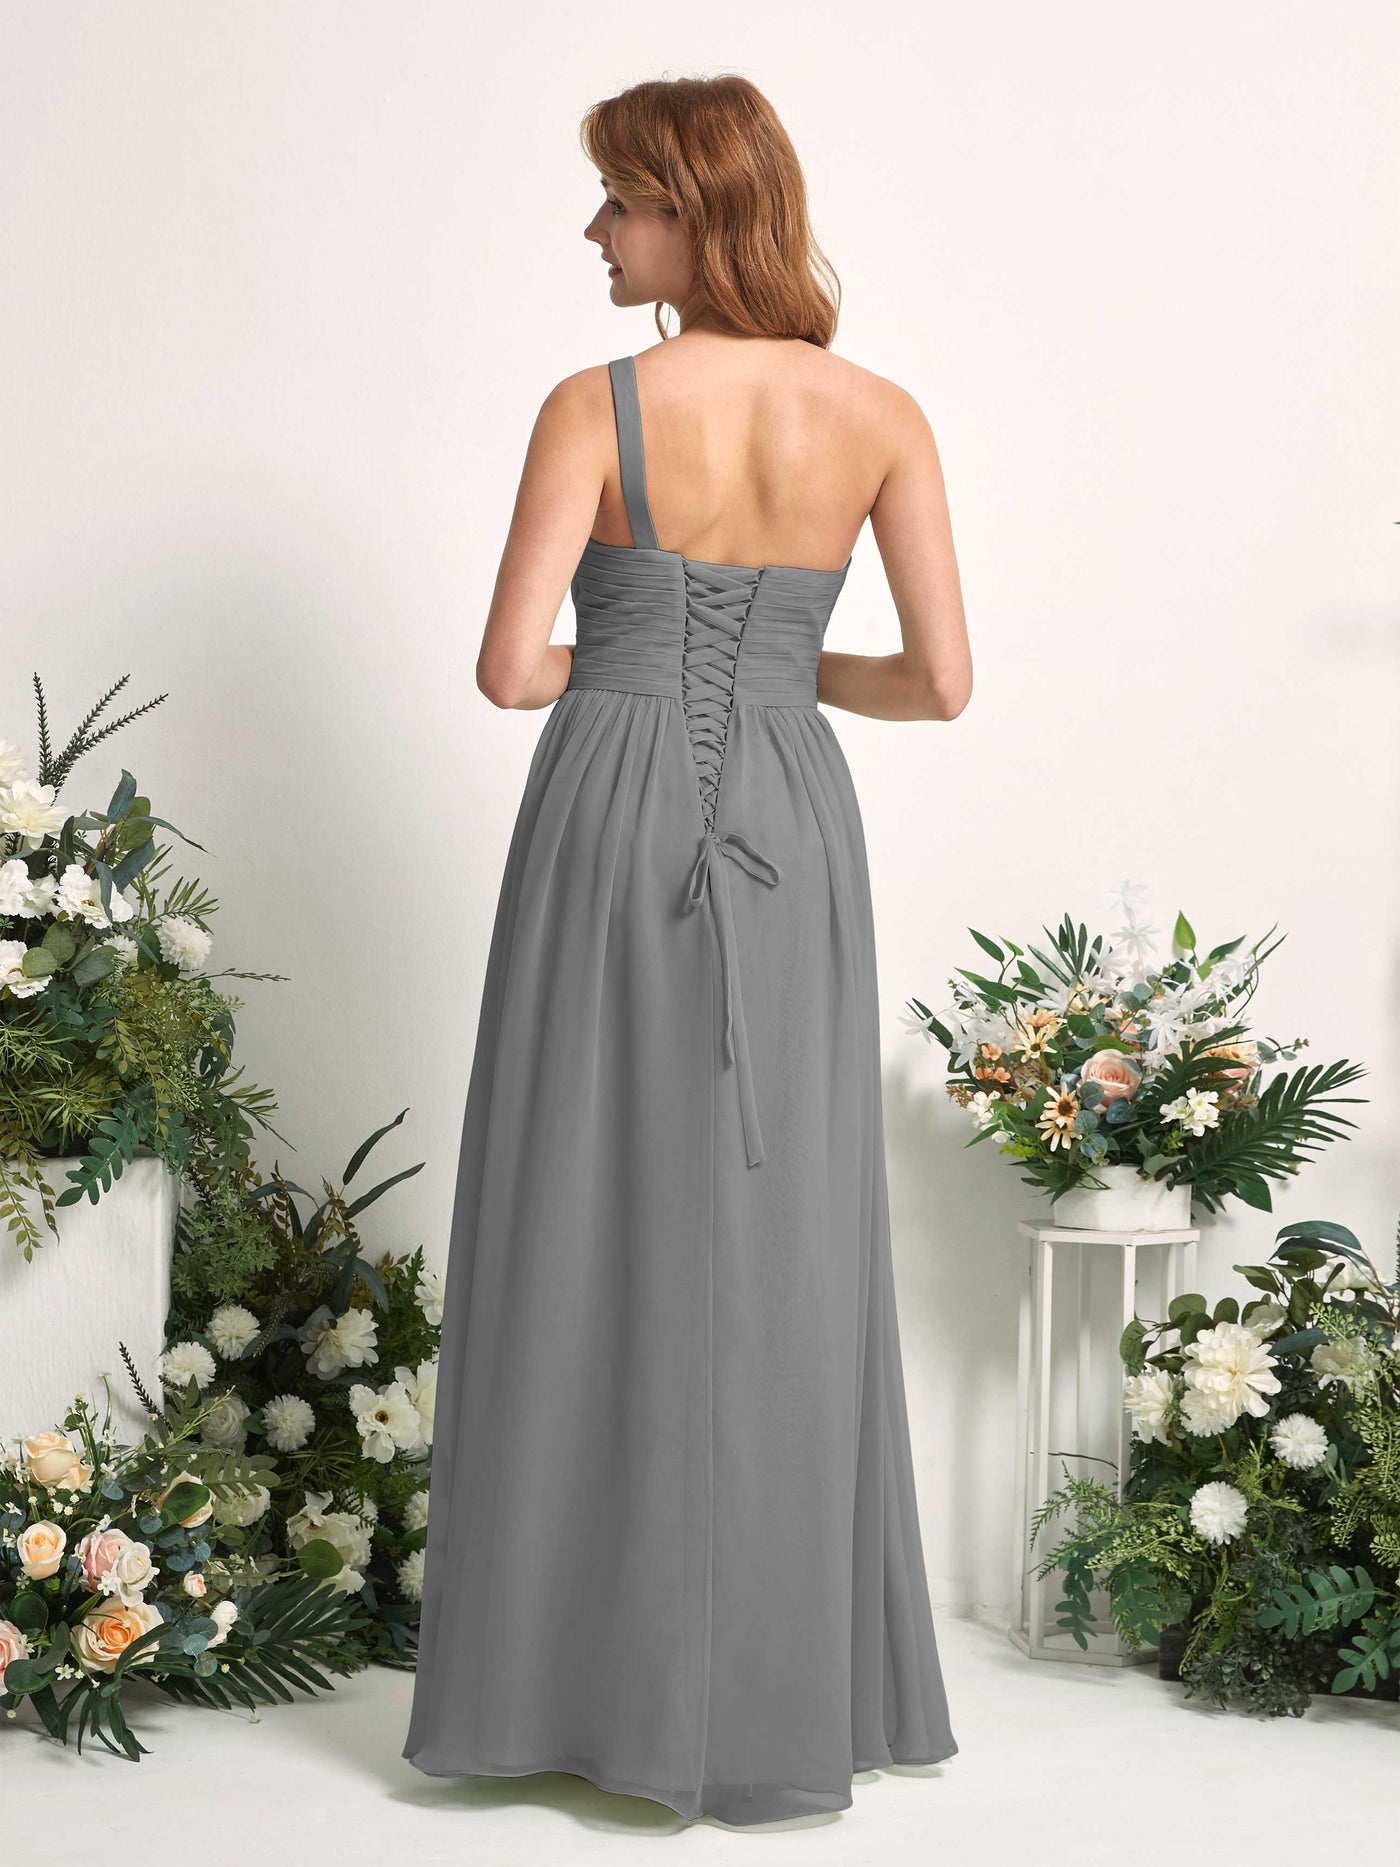 Bridesmaid Dress A-line Chiffon One Shoulder Full Length Sleeveless Wedding Party Dress - Steel Gray (81226720)#color_steel-gray